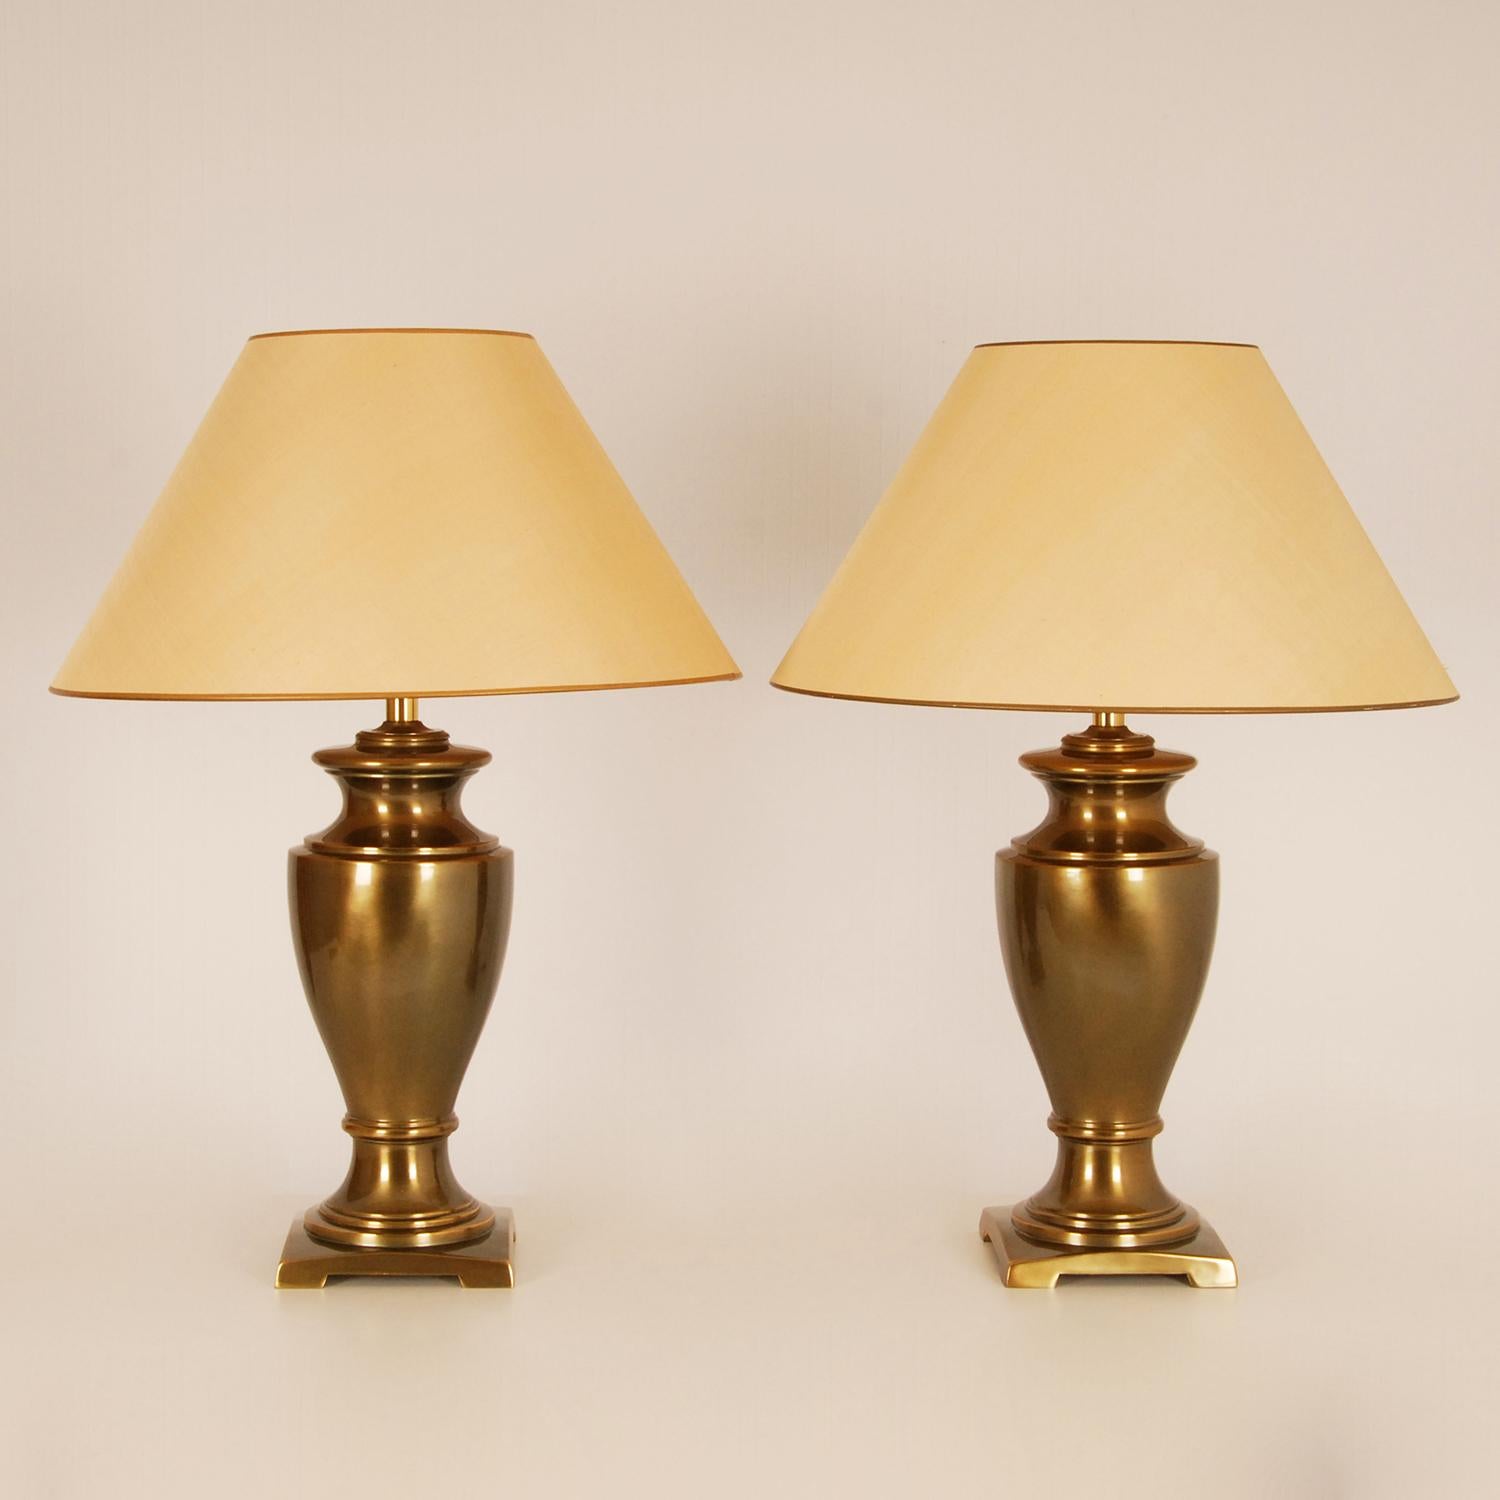 Neoclassical Revival Vintage 1970s Gold Gilt Brass Neoclassical Vase Table Lamps, a Pair For Sale